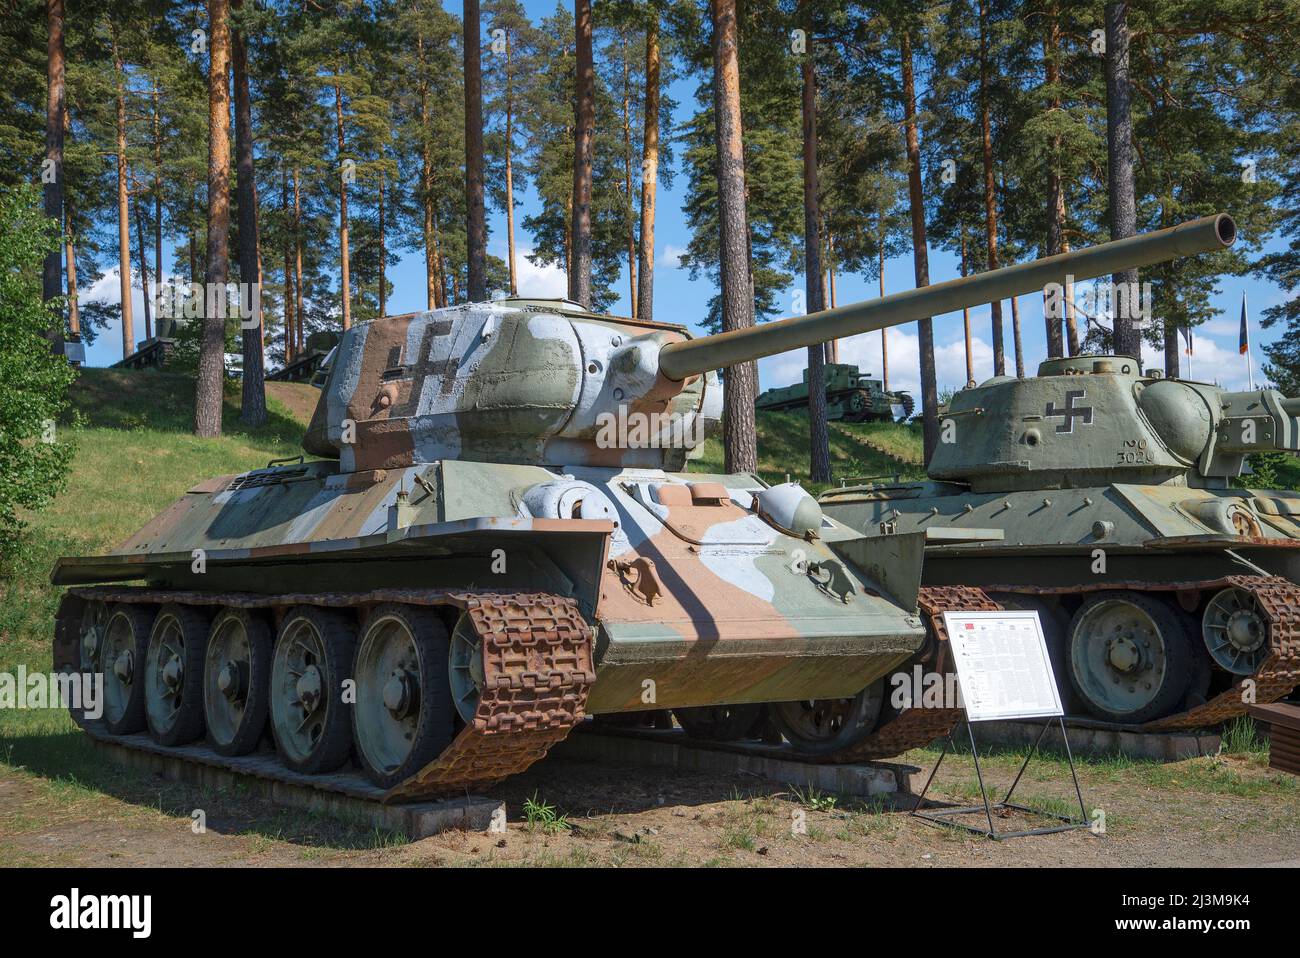 PAROLA, FINLAND - JUNE 10, 2017: Captured Soviet tank T-34-85 from the period of World War II in the tank museum of the city of Parola Stock Photo